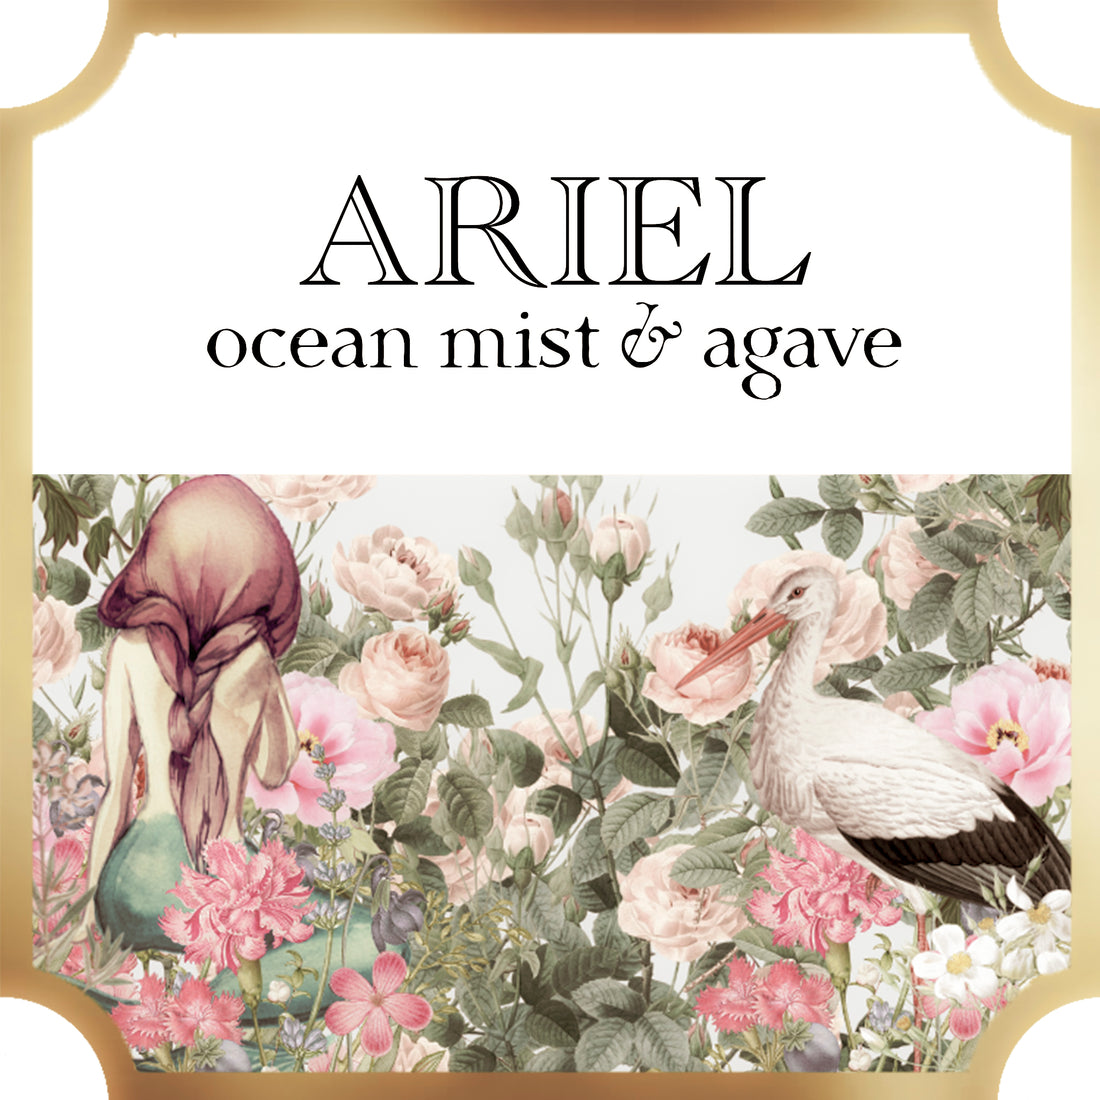  ariel collection a pleasant thought